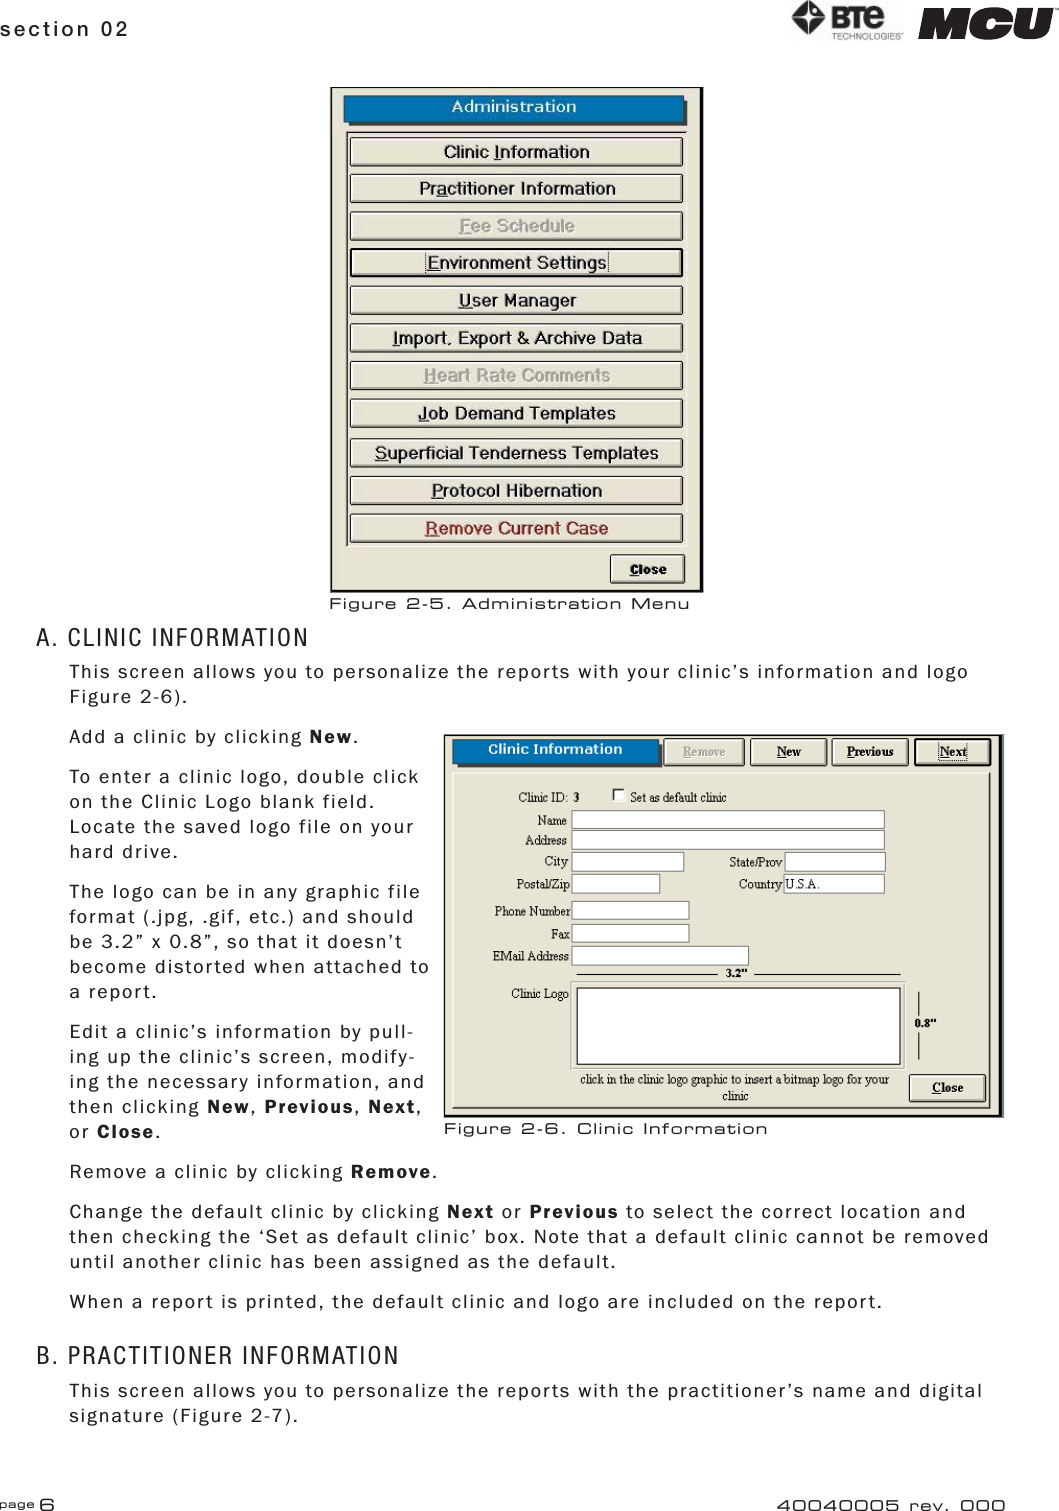 page 6section 02 40040005 rev. 000A. CLINIC INFORMATIONThis screen allows you to personalize the reports with your clinic’s information and logo Figure 2-6).Add a clinic by clicking New.To enter a clinic logo, double click on the Clinic Logo blank field. Locate the saved logo file on your hard drive.The logo can be in any graphic file format (.jpg, .gif, etc.) and should be 3.2” x 0.8”, so that it doesn’t become distorted when attached to a report.Edit a clinic’s information by pull-ing up the clinic’s screen, modify-ing the necessary information, and then clicking New, Previous, Next, or Close.Remove a clinic by clicking Remove.Change the default clinic by clicking Next or Previous to select the correct location and then checking the ‘Set as default clinic’ box. Note that a default clinic cannot be removed until another clinic has been assigned as the default.When a report is printed, the default clinic and logo are included on the report.B. PRACTITIONER INFORMATIONThis screen allows you to personalize the reports with the practitioner’s name and digital signature (Figure 2-7).Figure 2-6. Clinic InformationFigure 2-5. Administration Menu